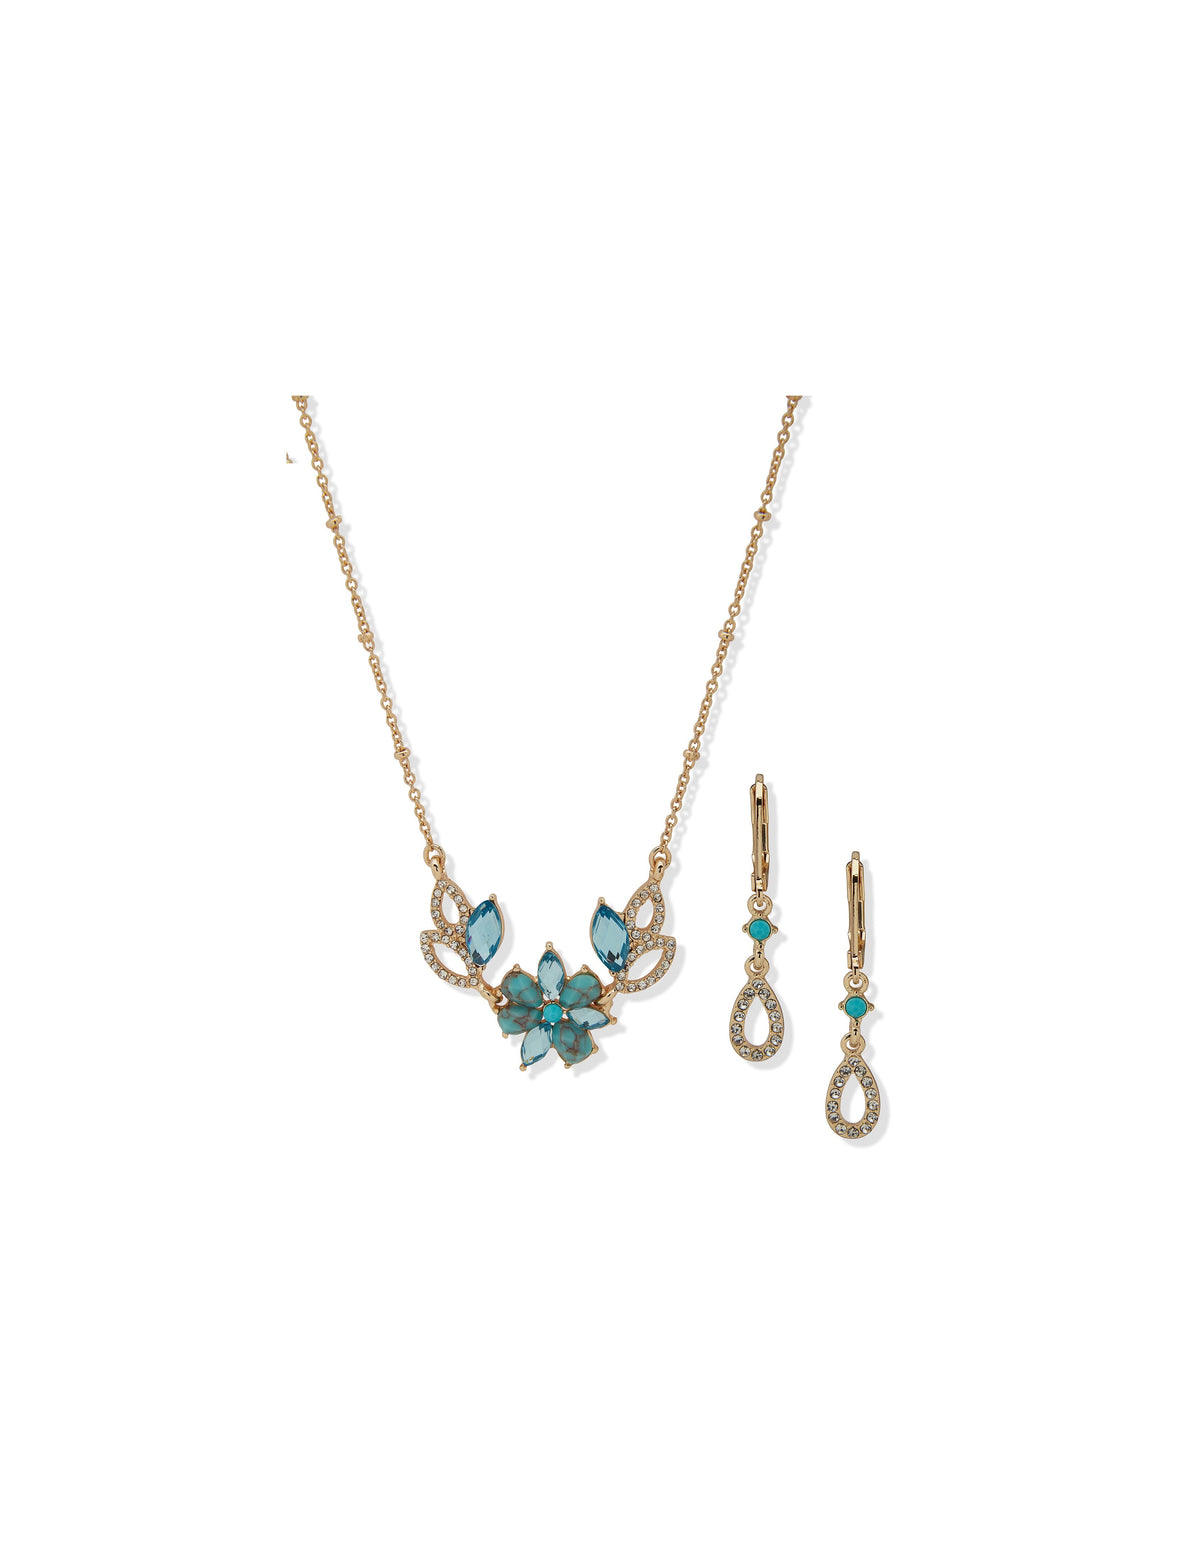 Anne Klein Gold Tone Turquoise Flower Necklace and Earring Set